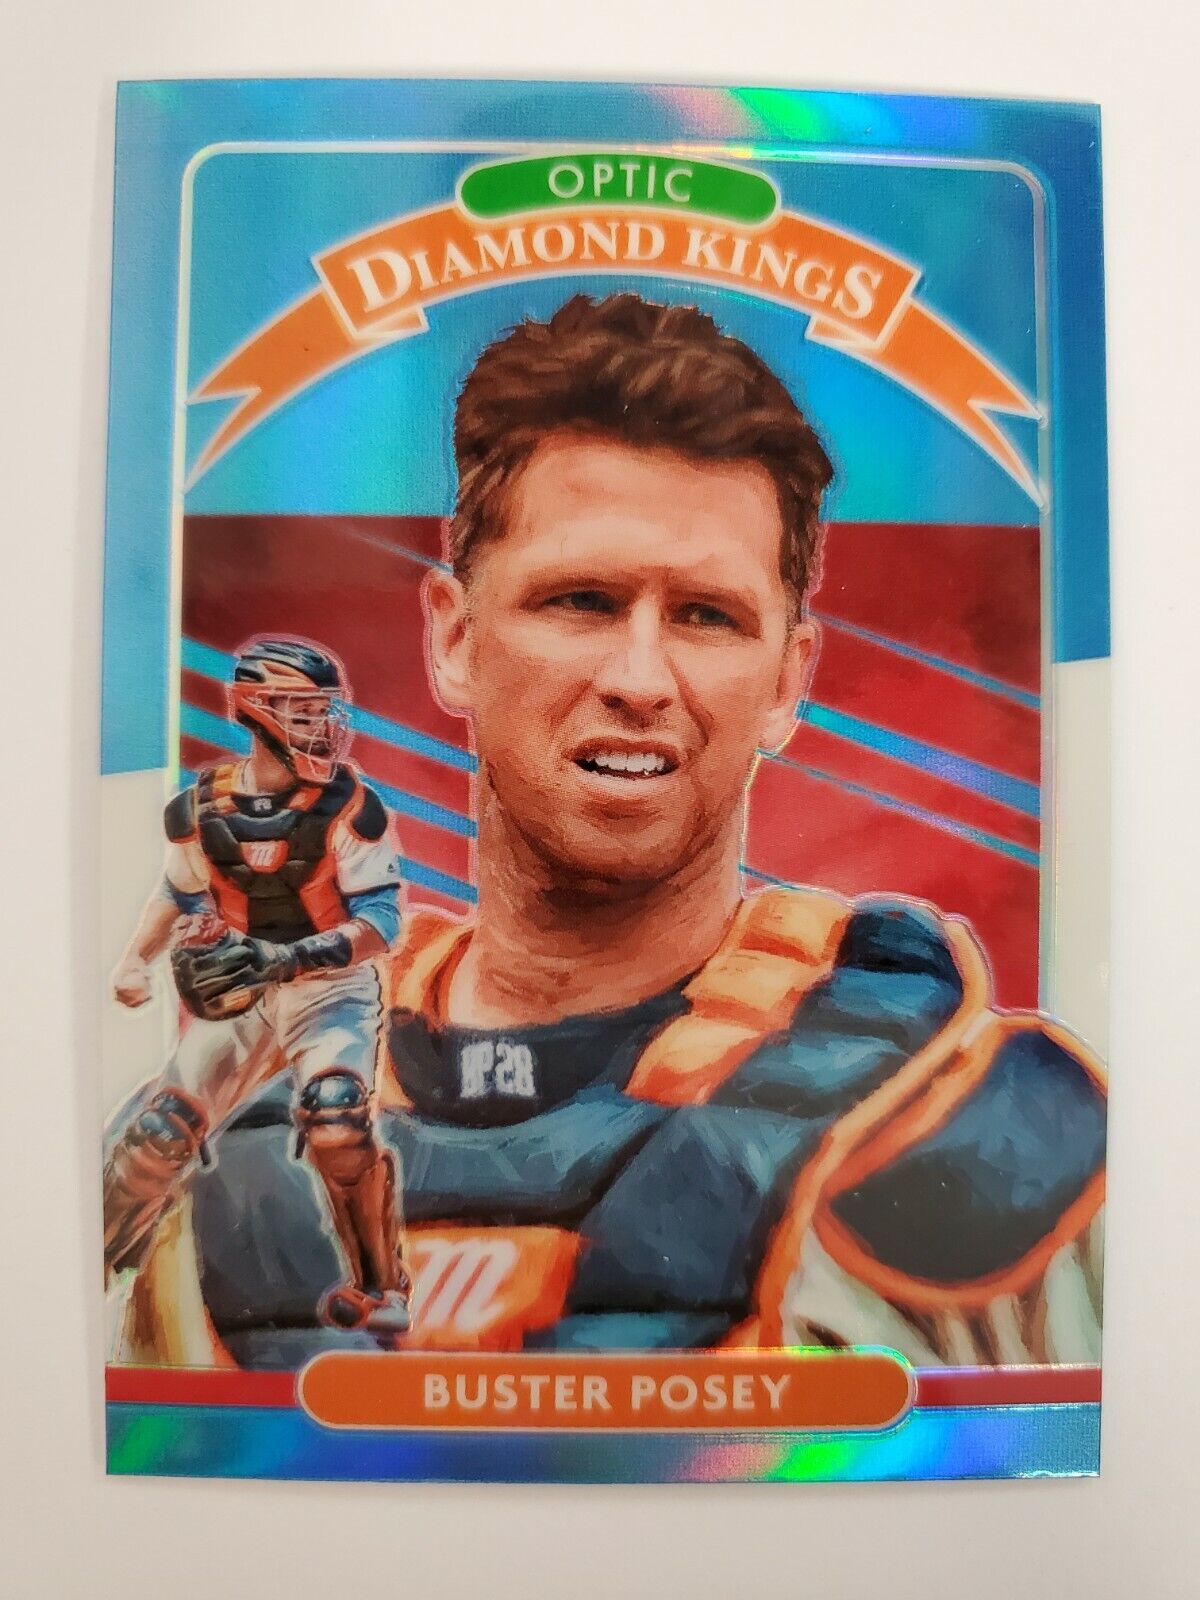 2020 Panini Donruss Optic Baseball - INSERT or PARALLEL or #d - Pick Your Card